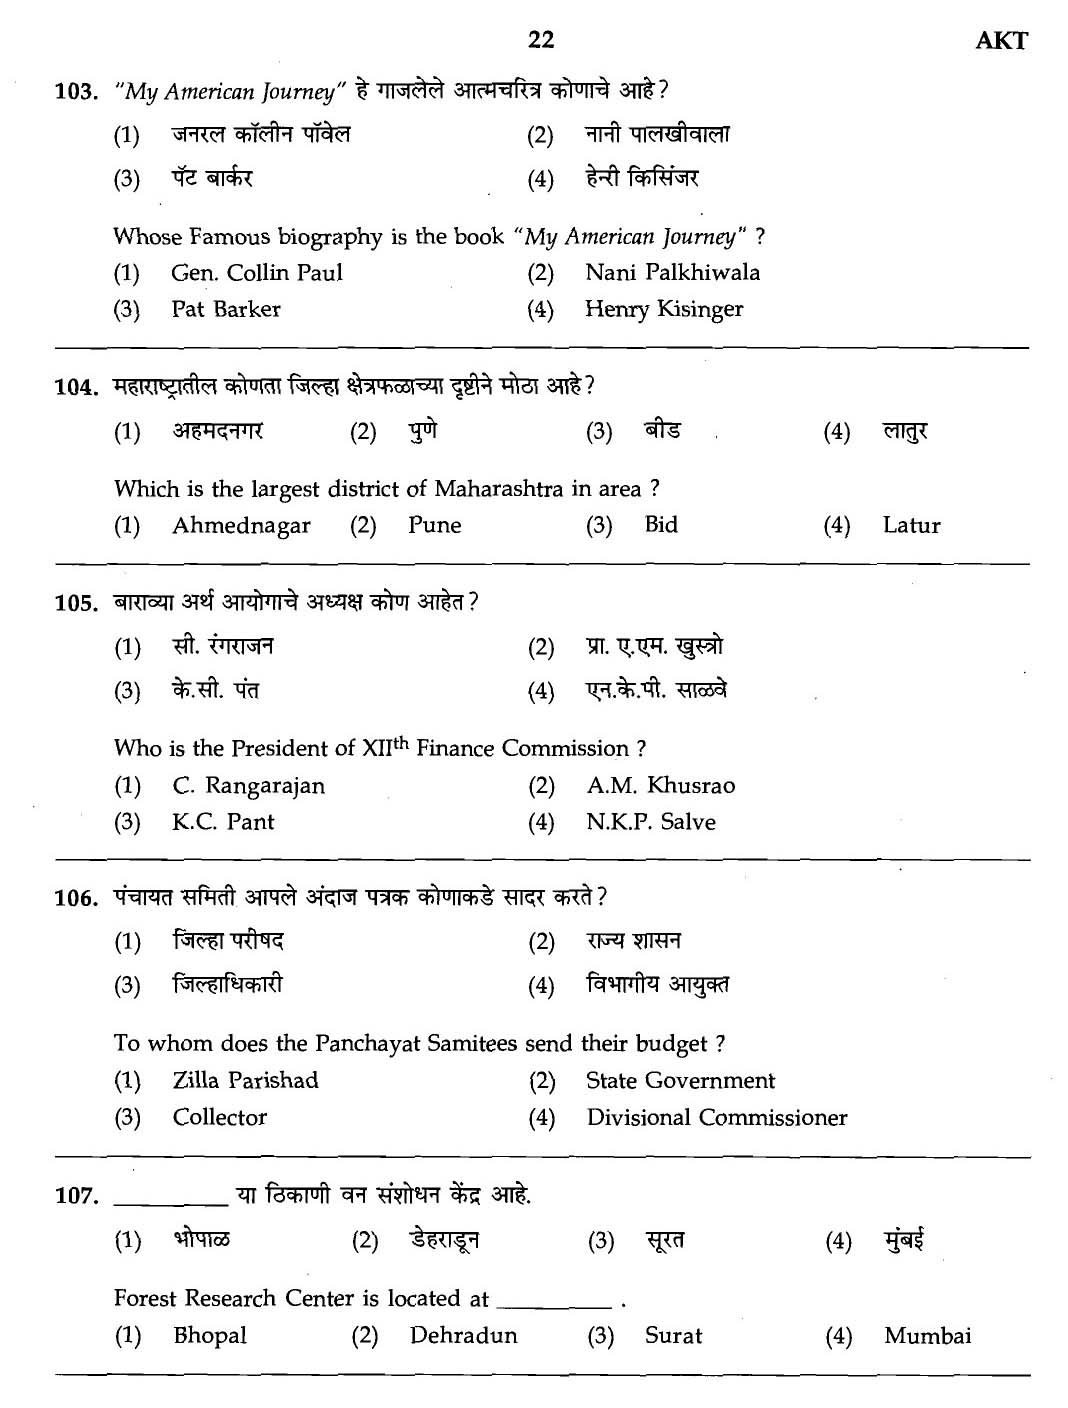 MPSC Agricultural Services Exam 2007 General Question Paper 20